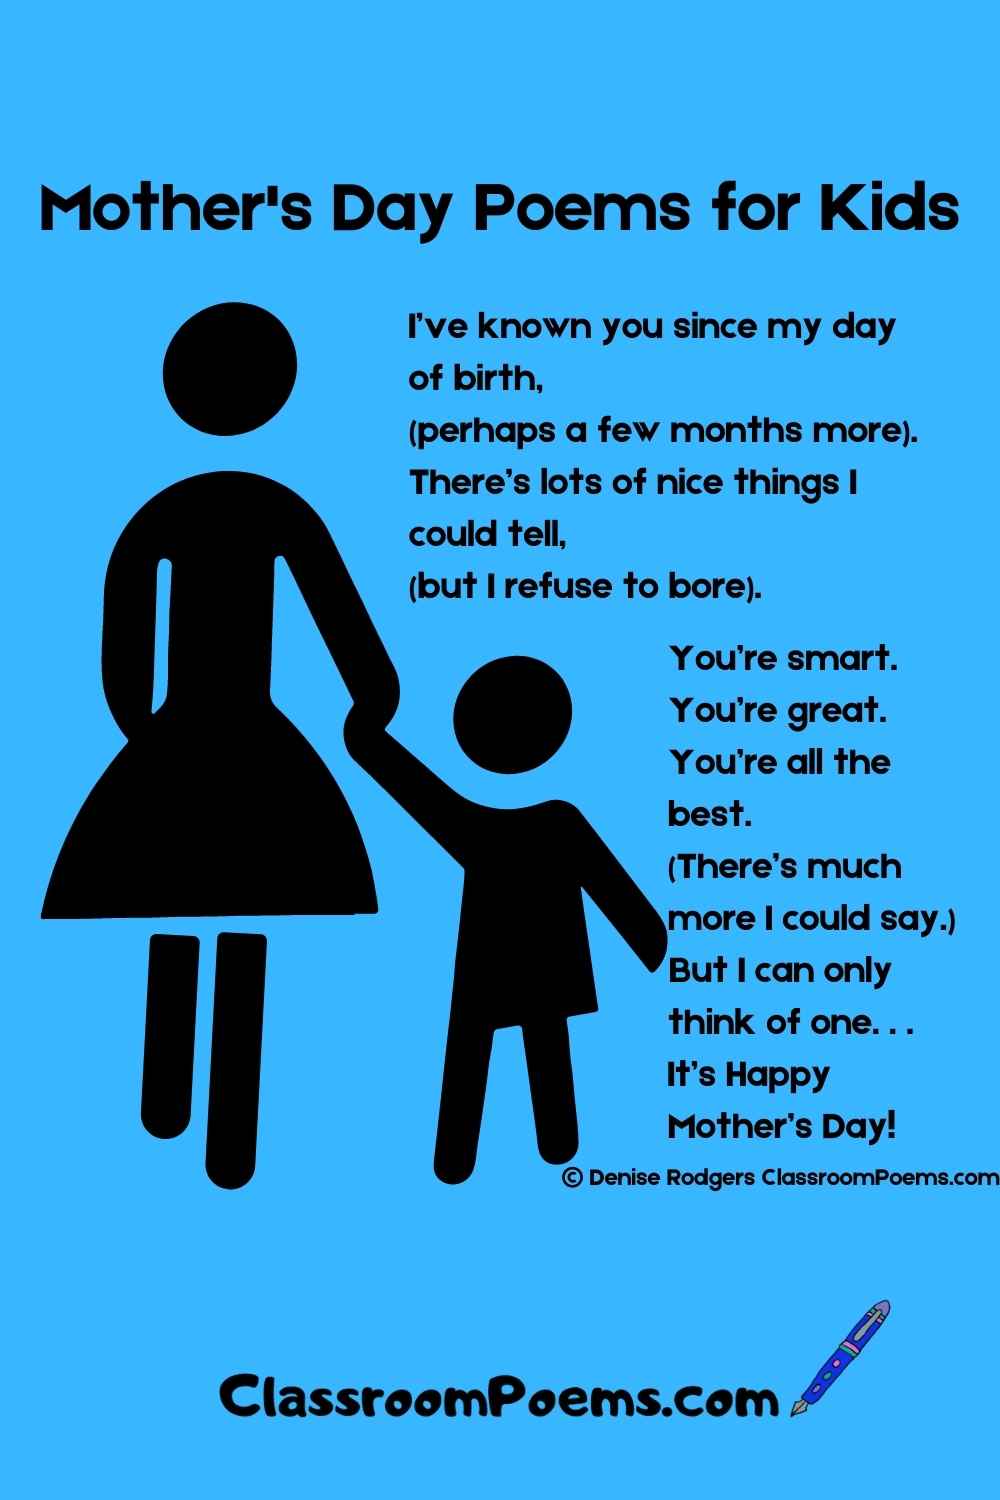 Mothers Day poems for kids by Denise Rodgers on ClassroomPoems.com.